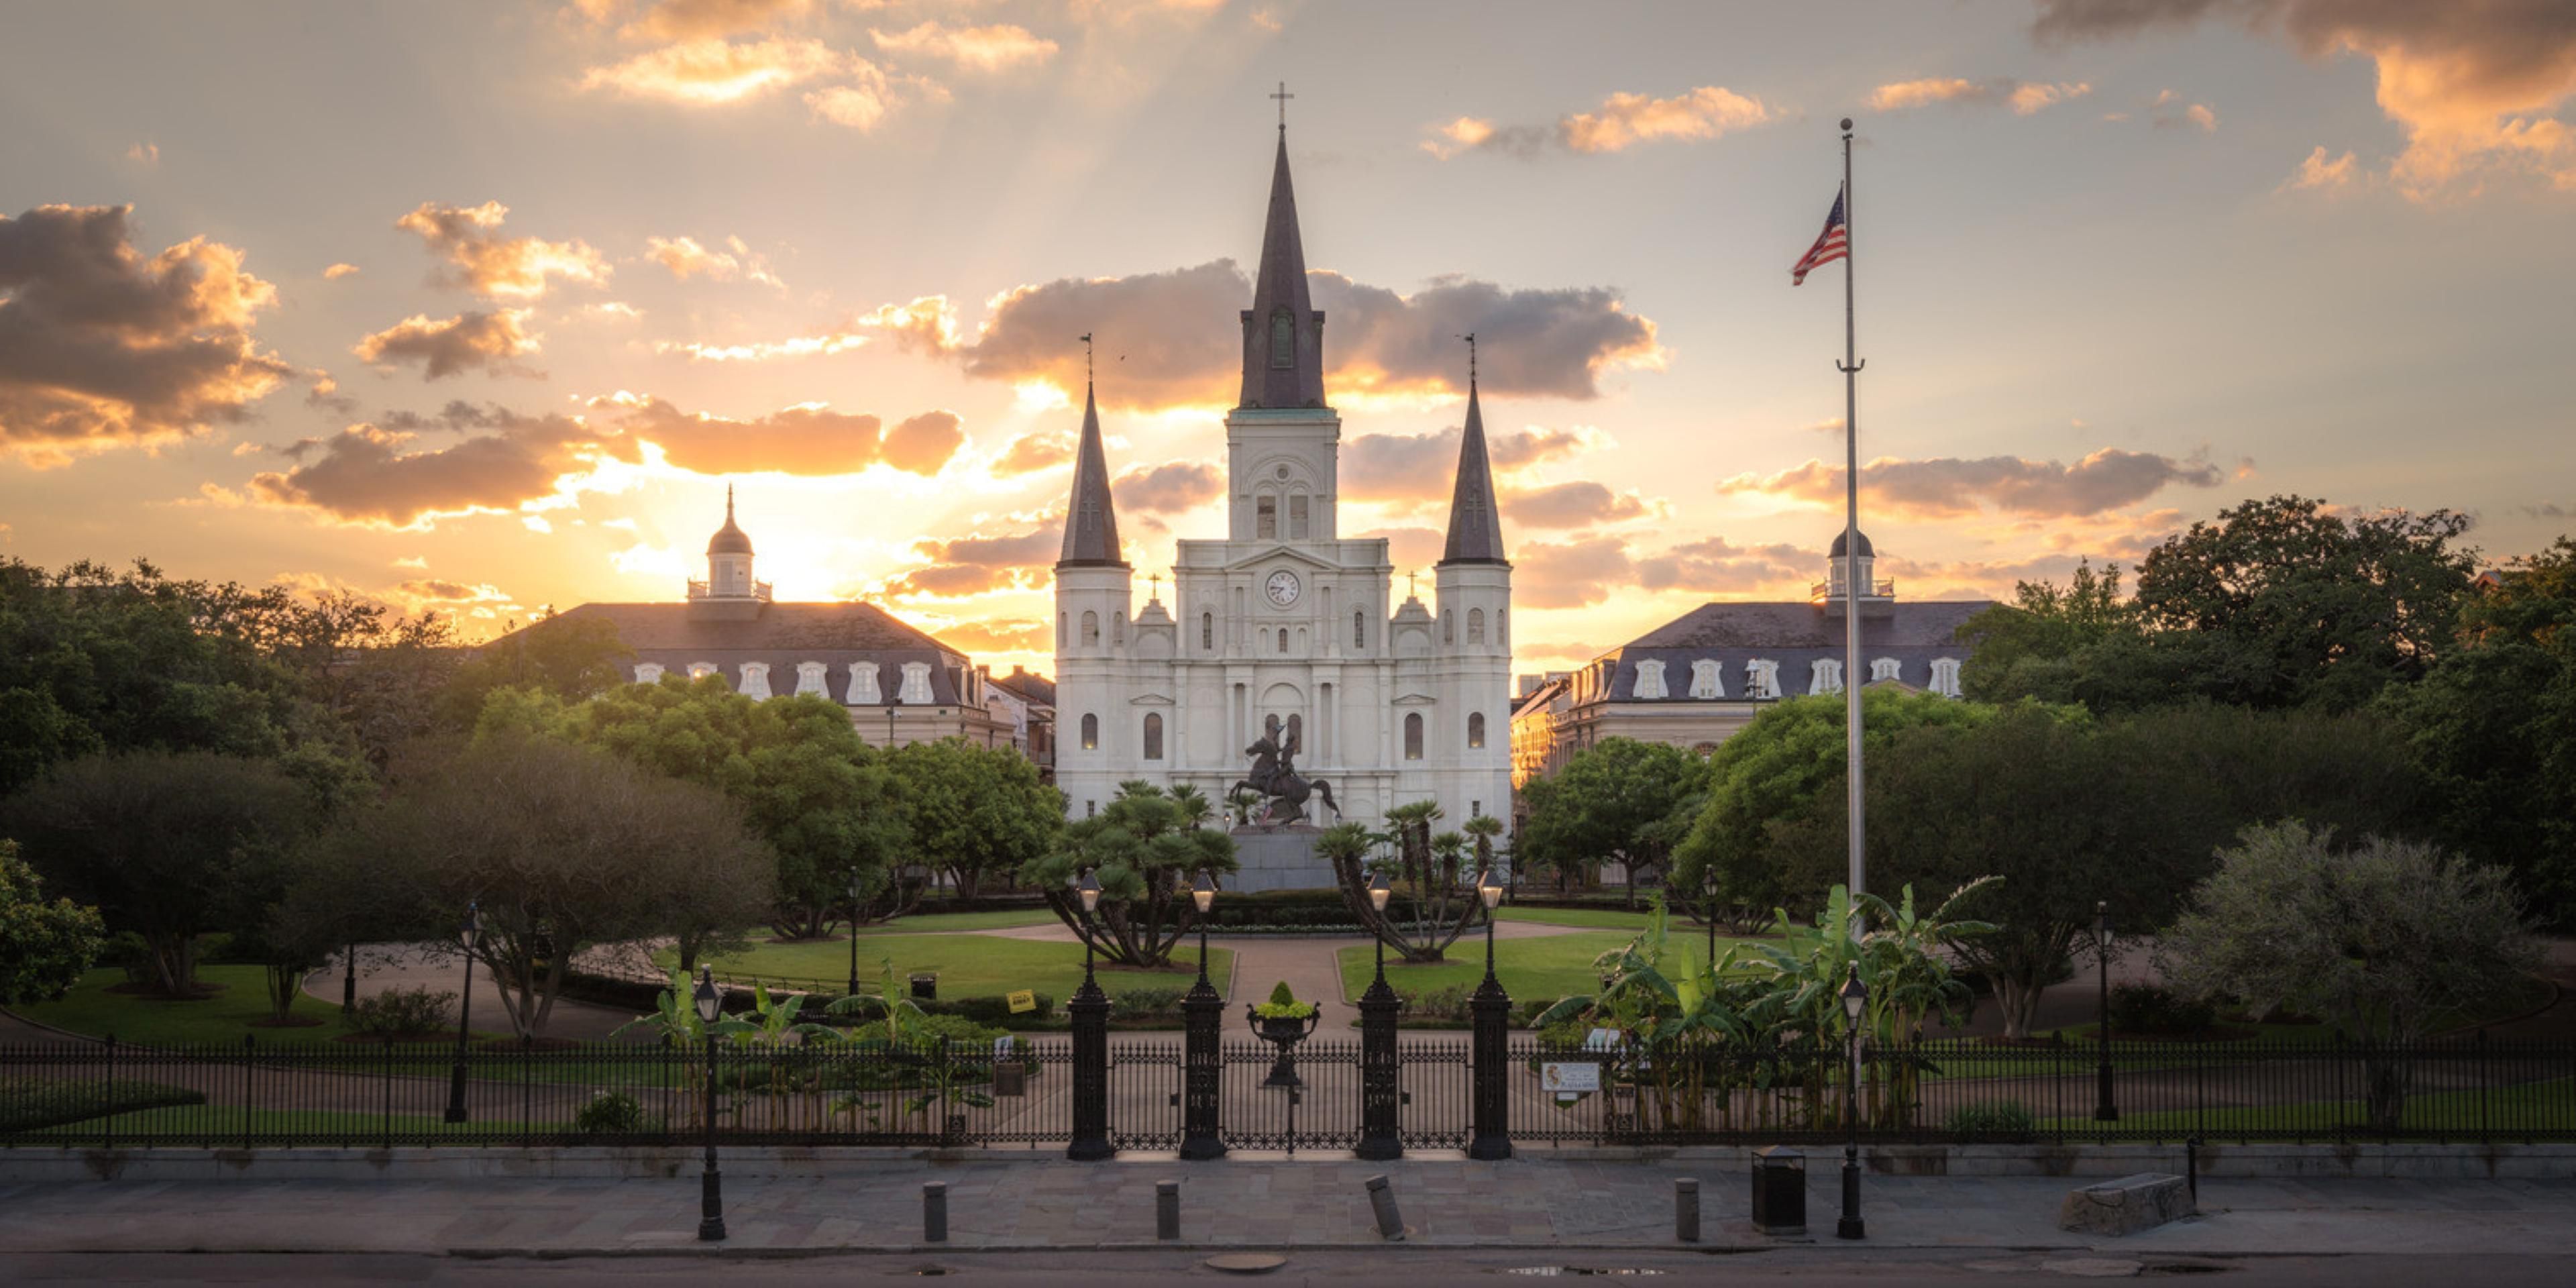 The hotel is located in the Central Business District of New Orleans and is just 4 blocks away from Bourbon Street and the French Quarter.